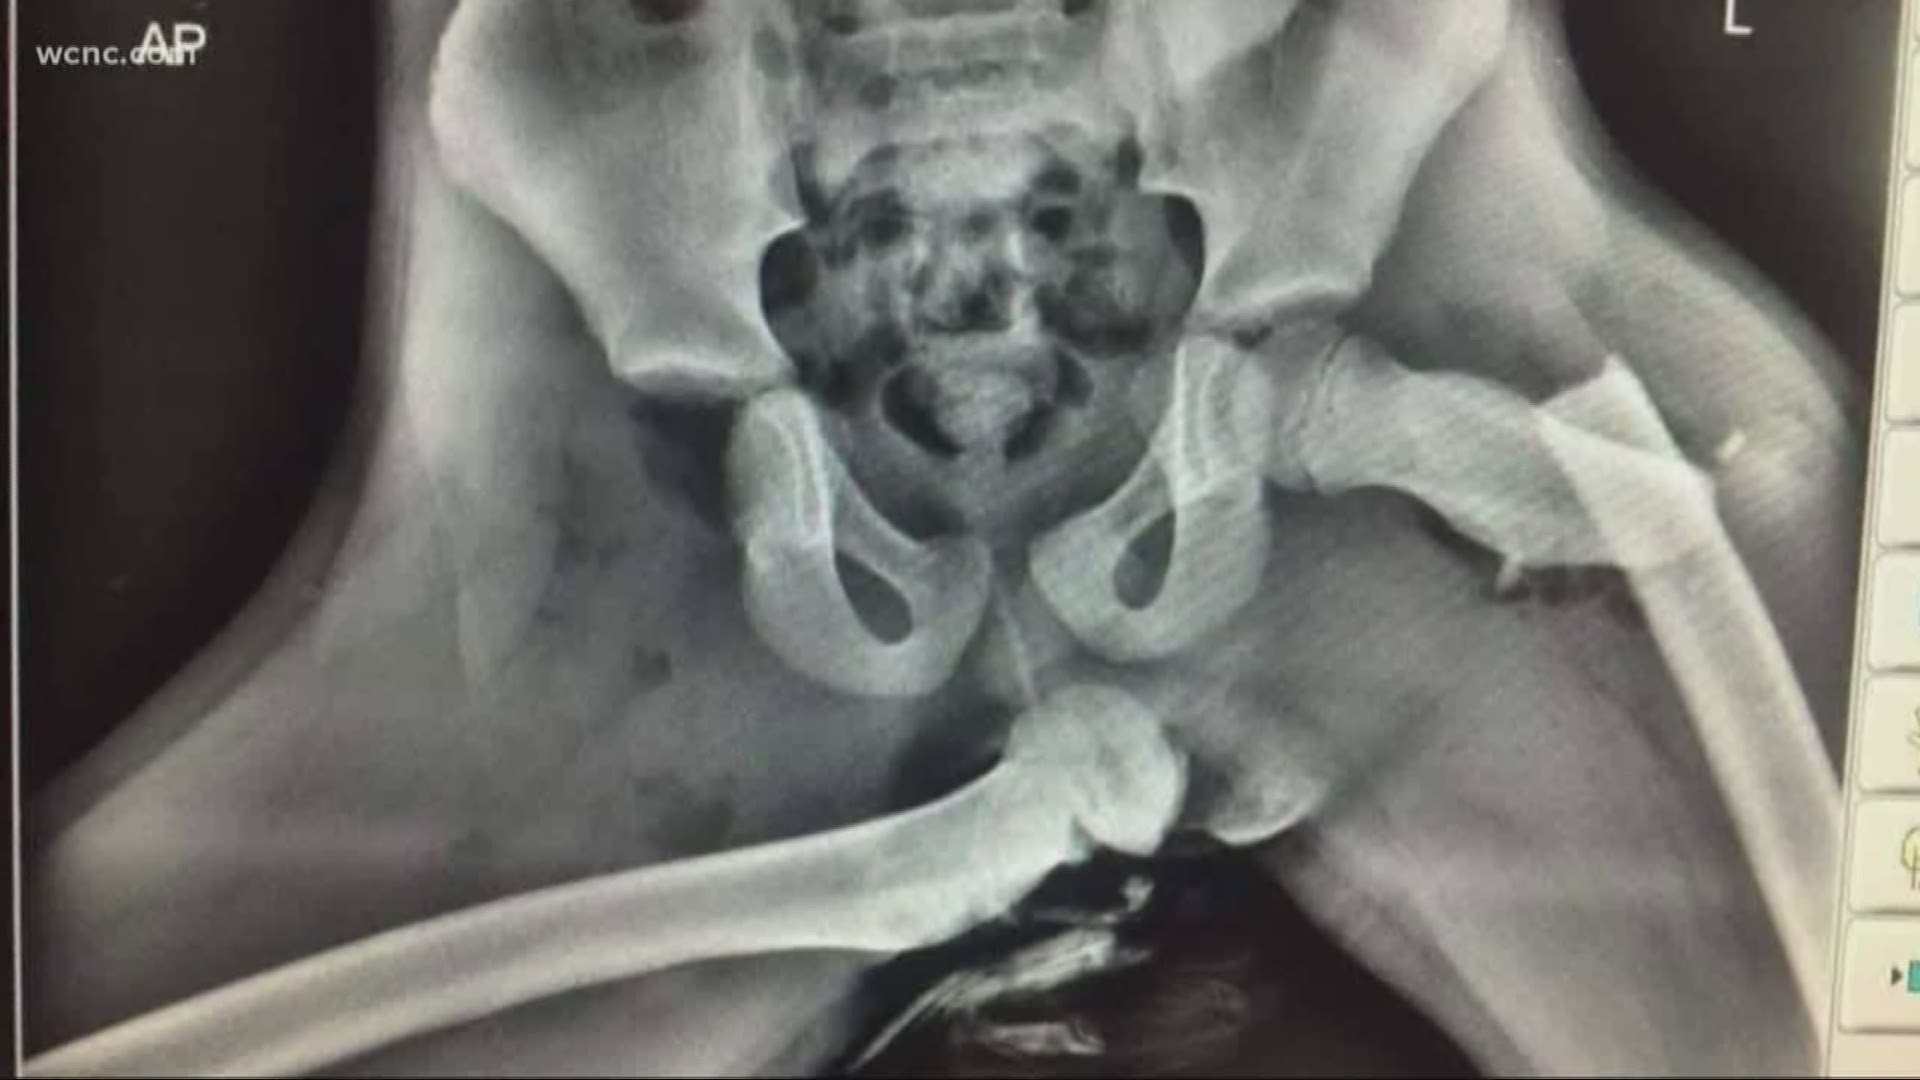 An x-ray photo is being shared showing the injuries doctors say a young woman suffered when she was a passenger involved in a crash.